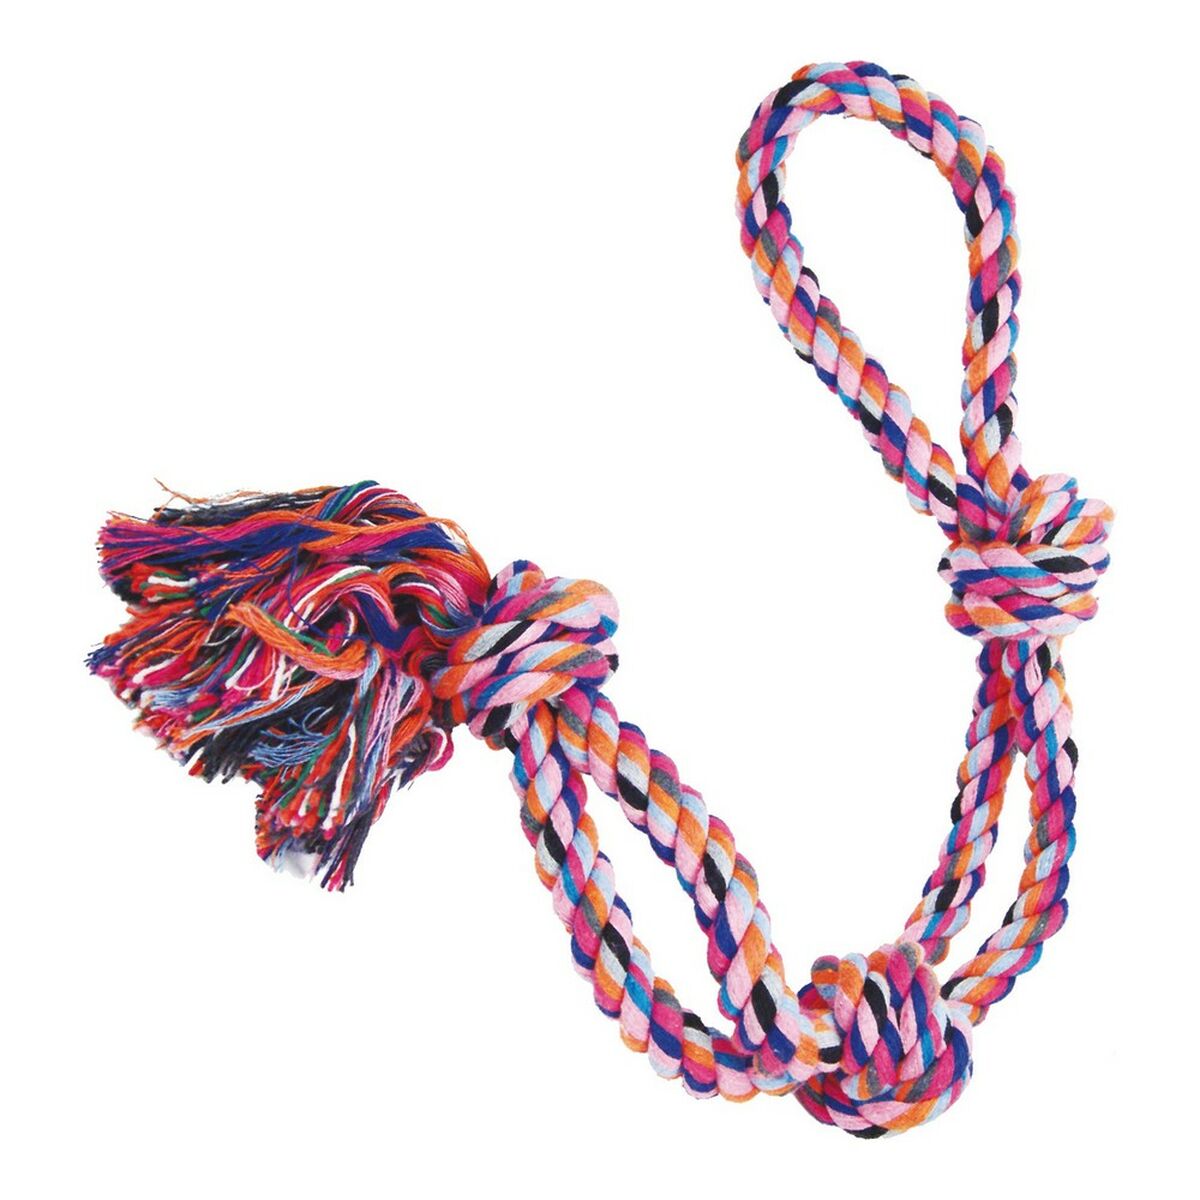 Dog chewing toy Gloria Multicolour Knot Cotton (64 cm)